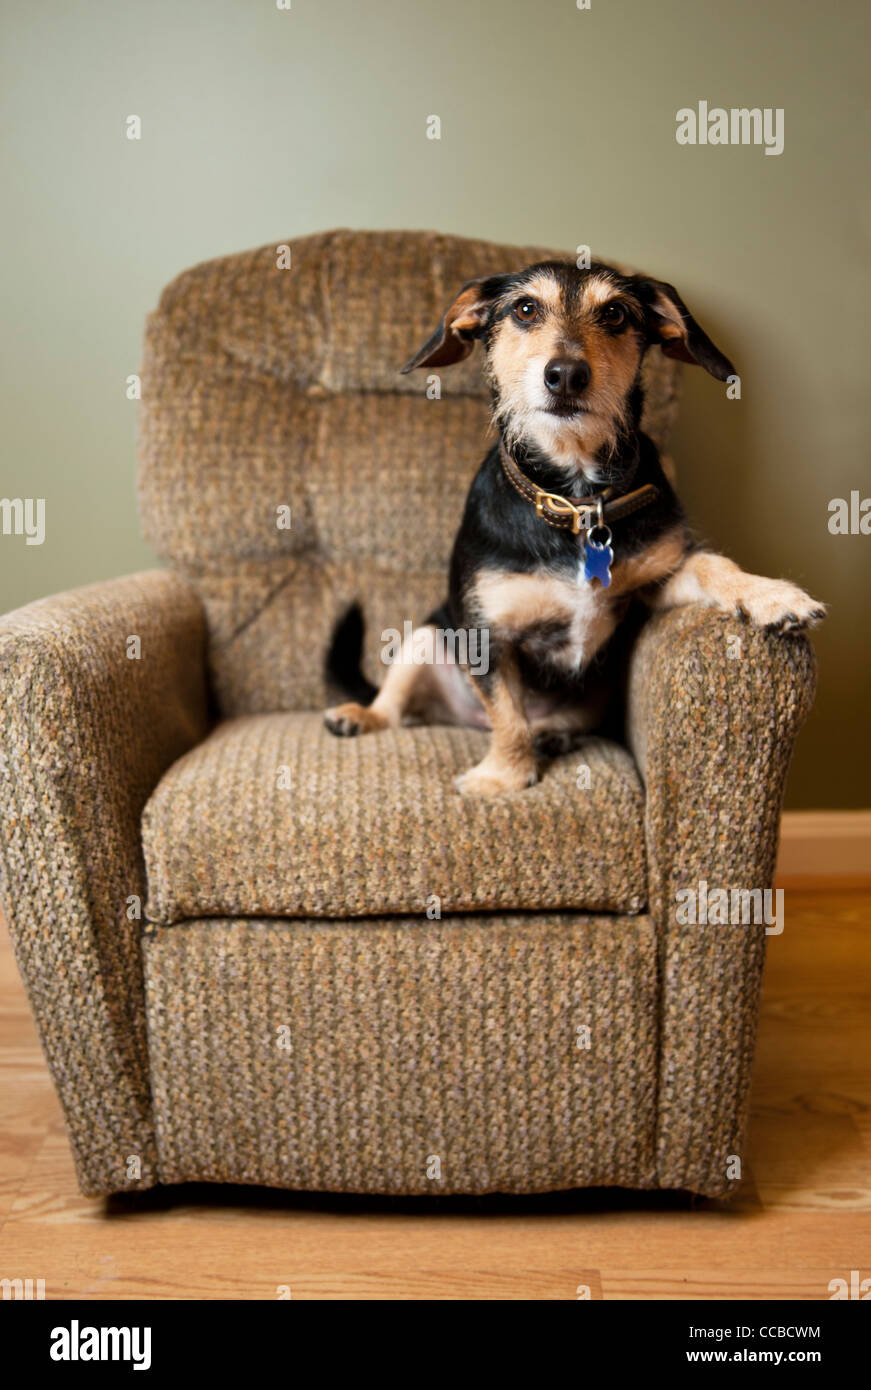 Dachshund sitting on a reclining chair with cute pose Stock Photo